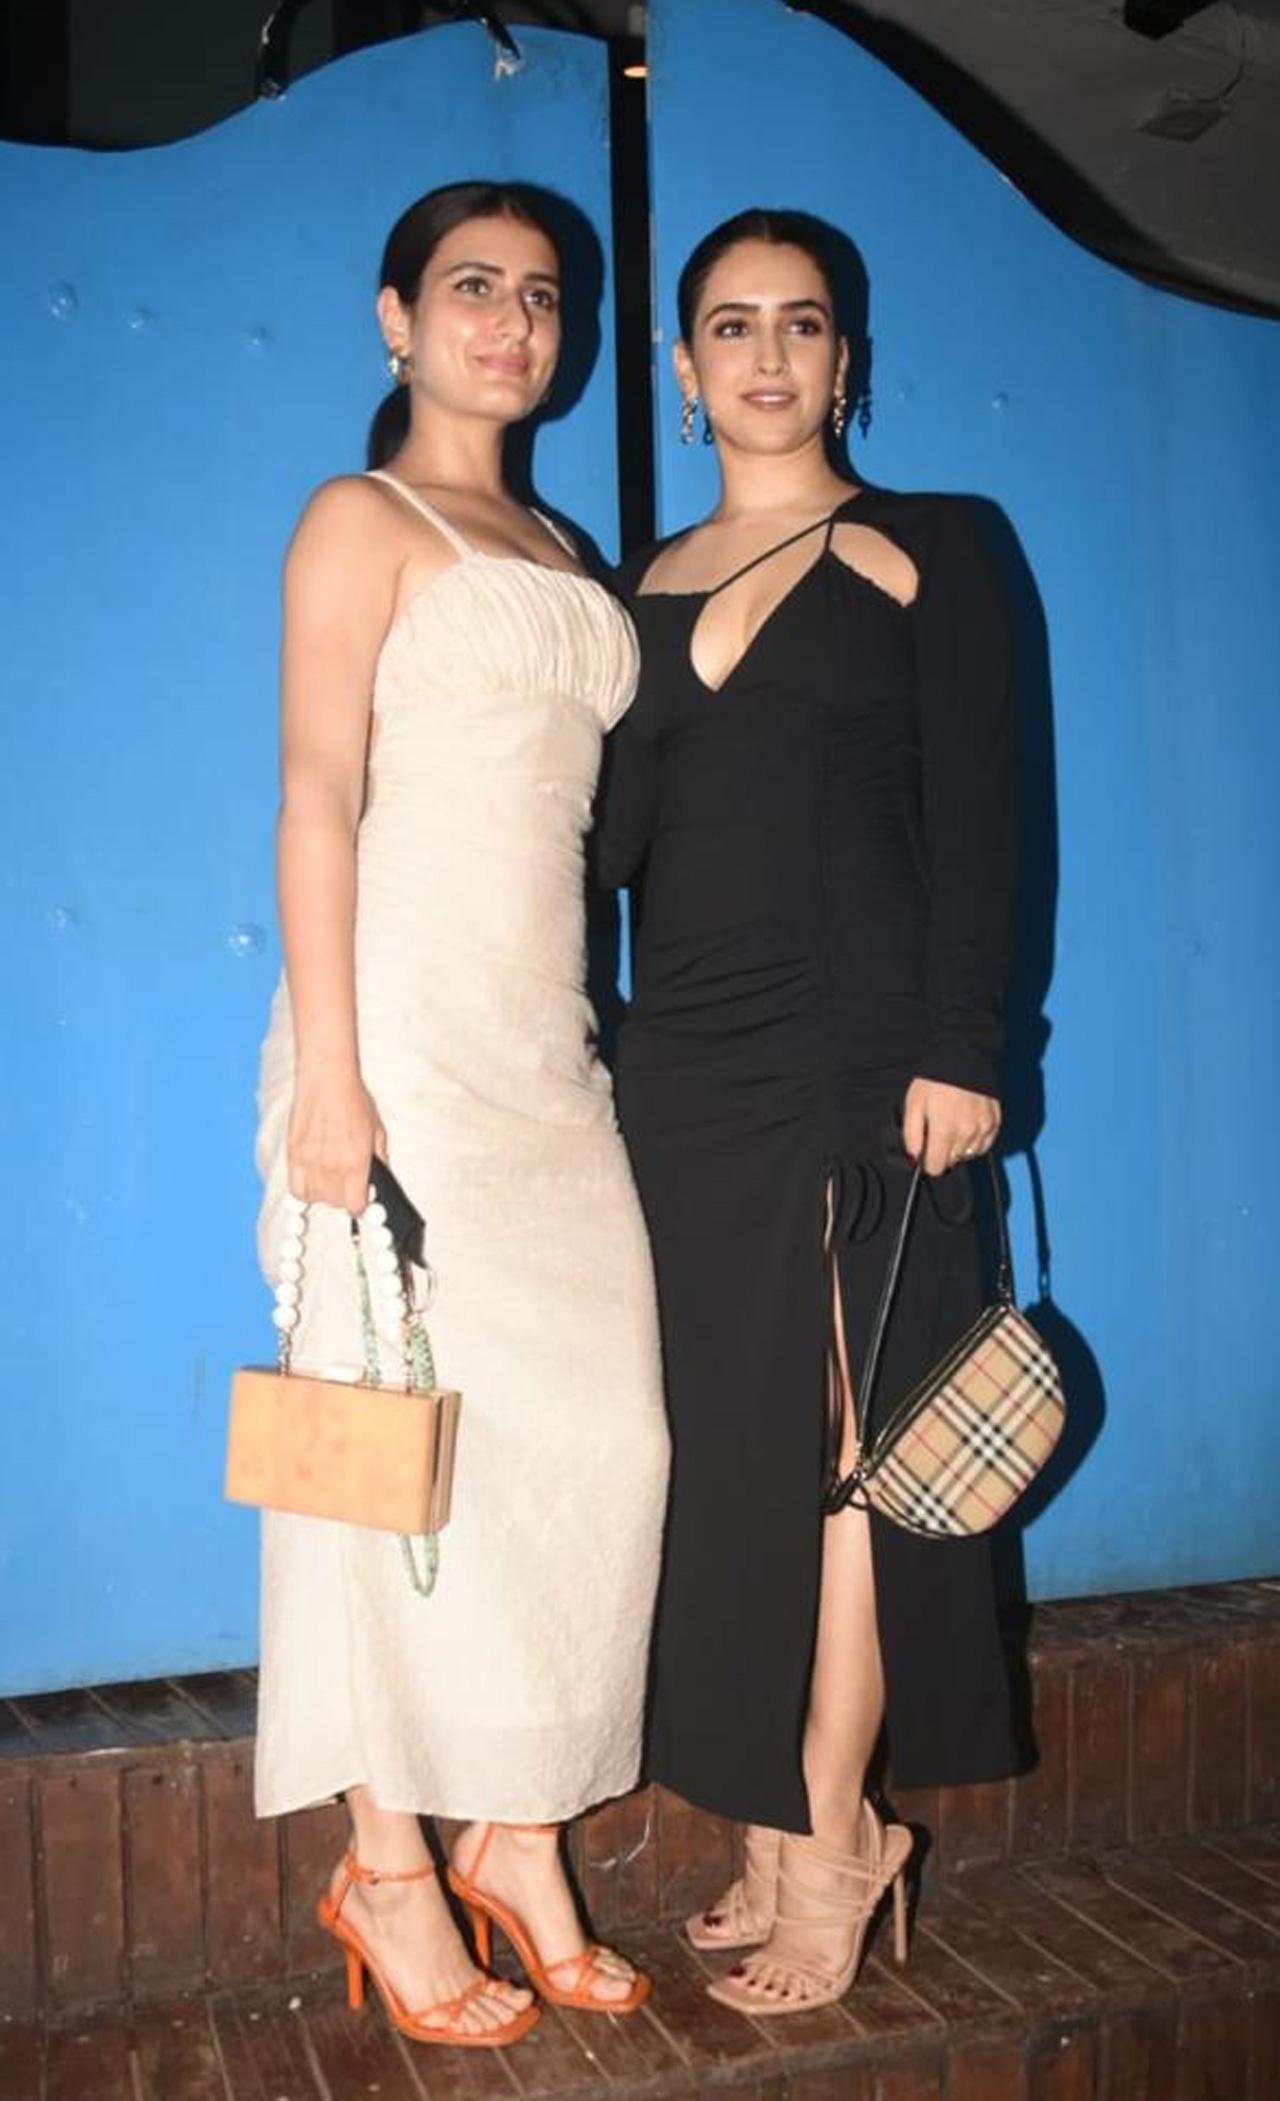 The two actors and on-screen sisters of Dangal posed for the flashbulbs and gave us major nostalgic feels. Here’s hoping they team up for another film. They did Anurag Basu’s Ludo last year as well.